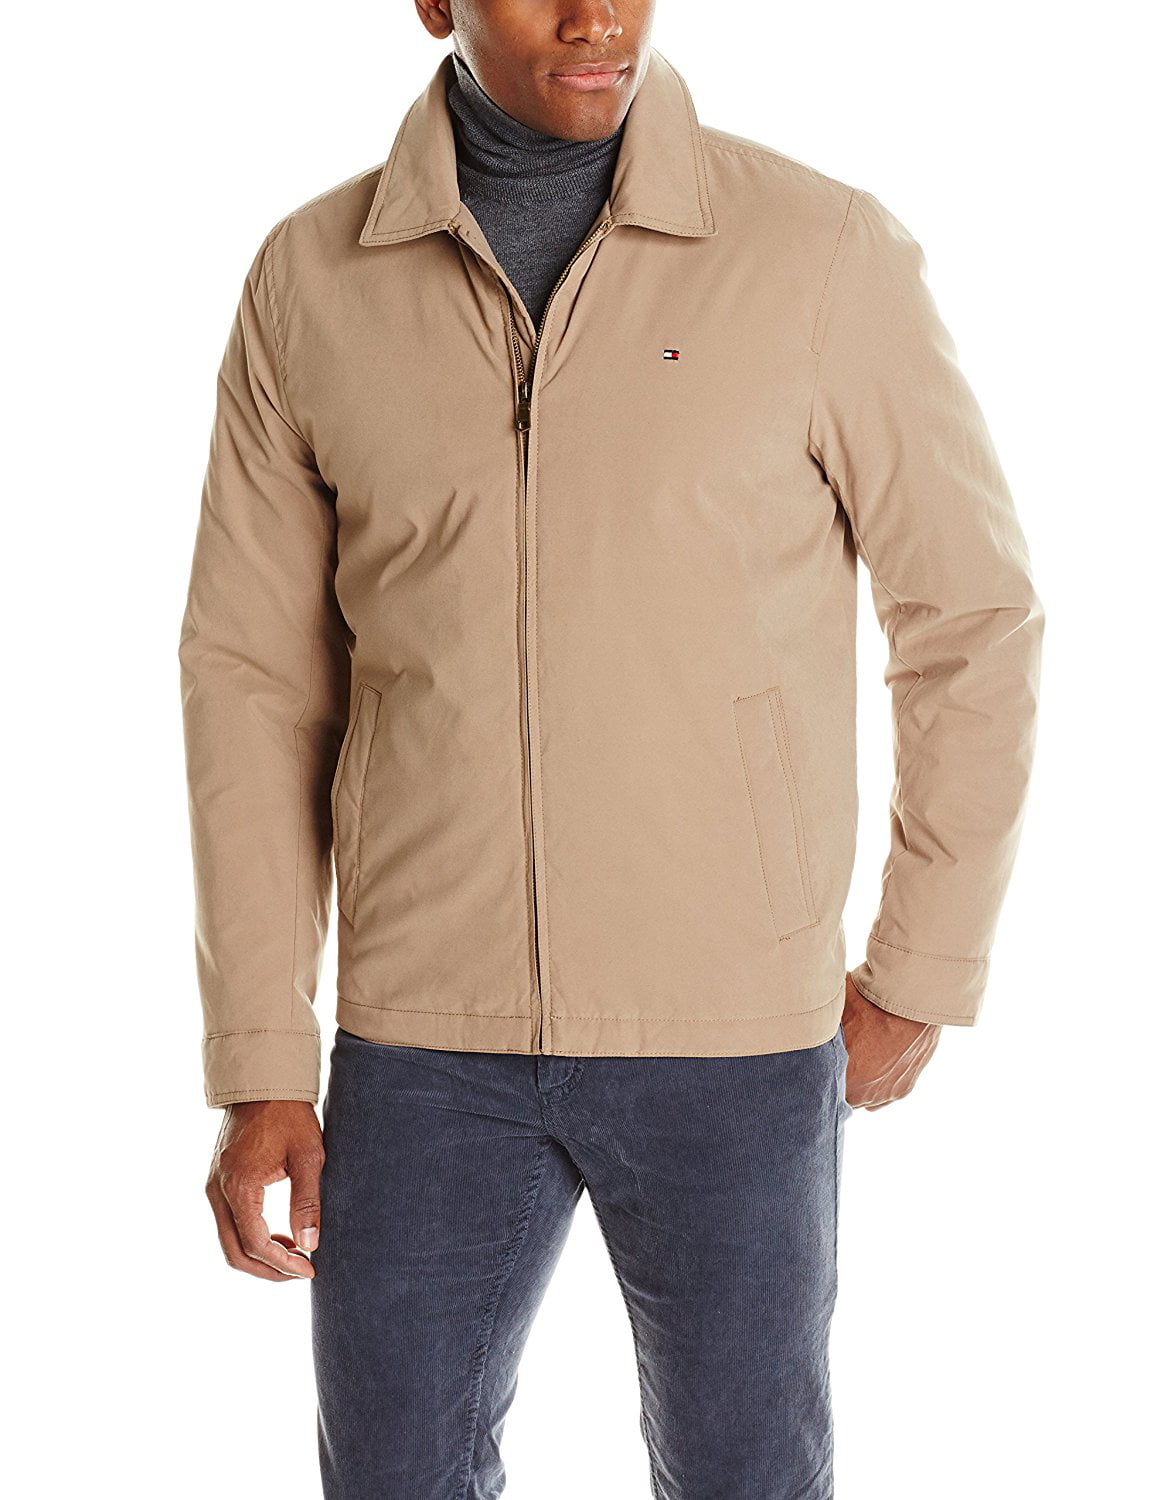 Tommy Hilfiger Mens Micro-Twill Open-Bottom Zip-Front Jacket